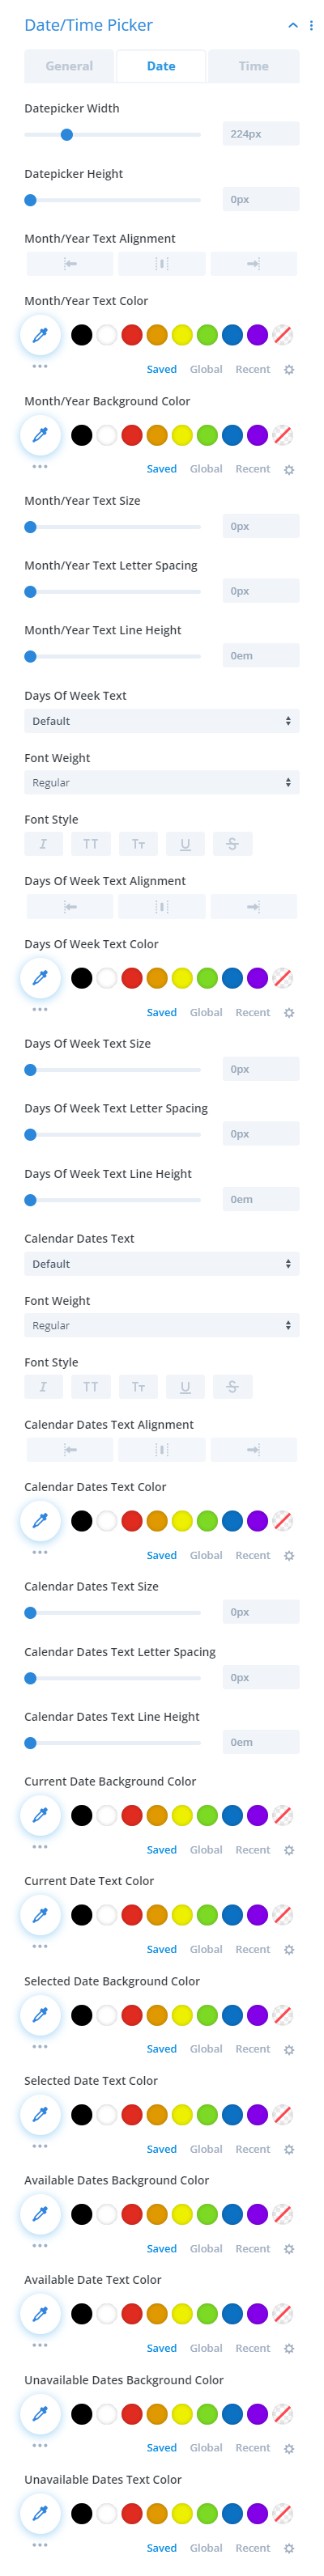 date design settings for the date and time picker in the Divi Contact Form Helper plugin